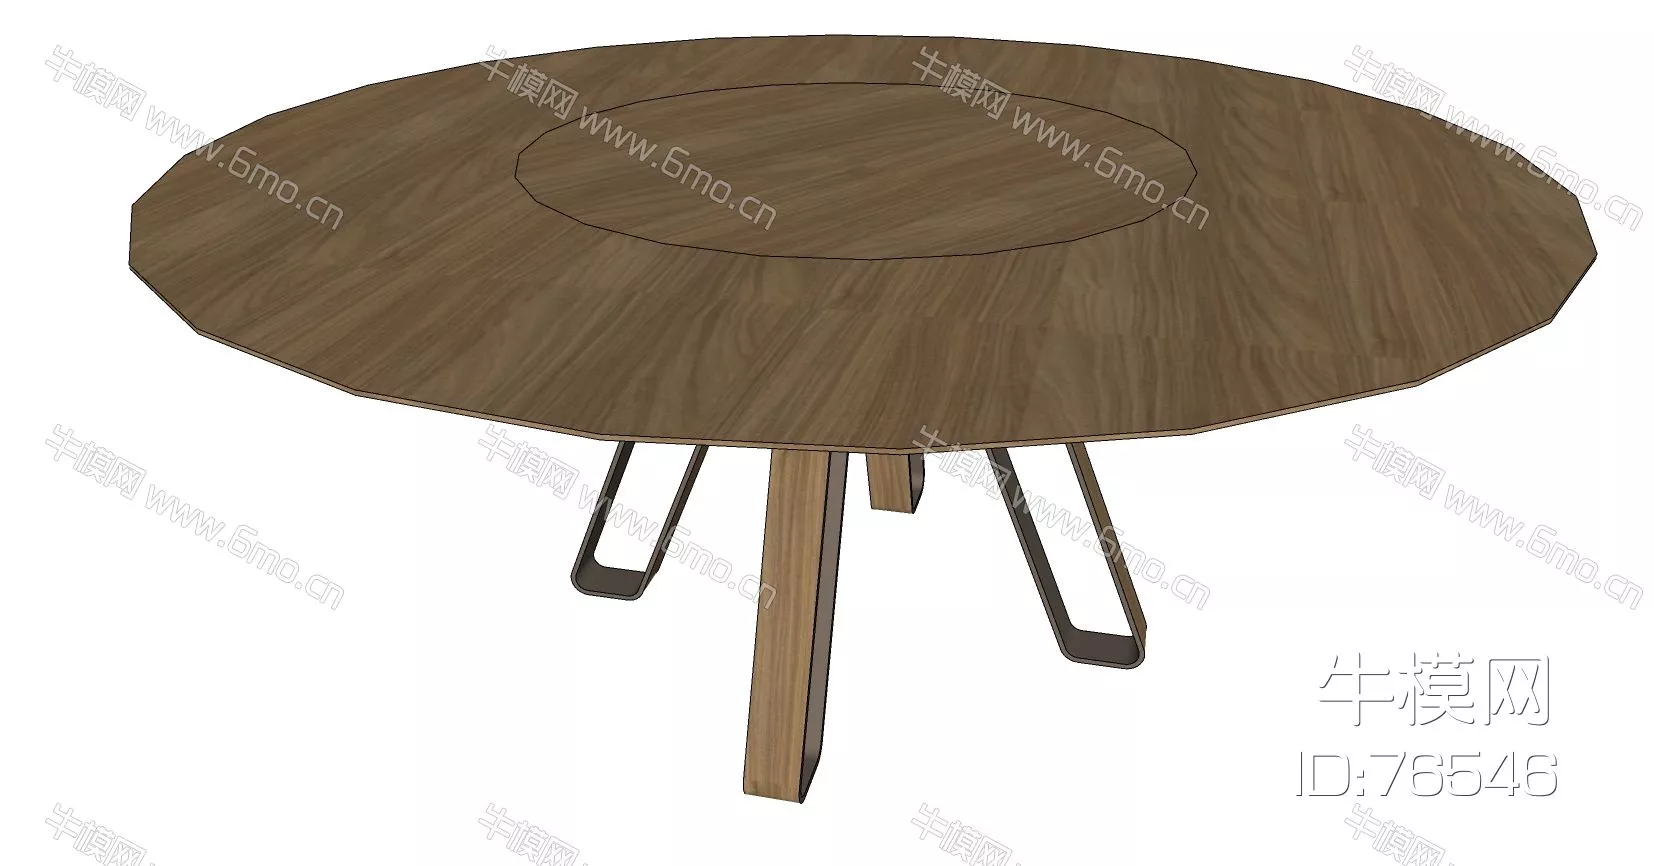 MODERN COFFEE TABLE - SKETCHUP 3D MODEL - ENSCAPE - 76546